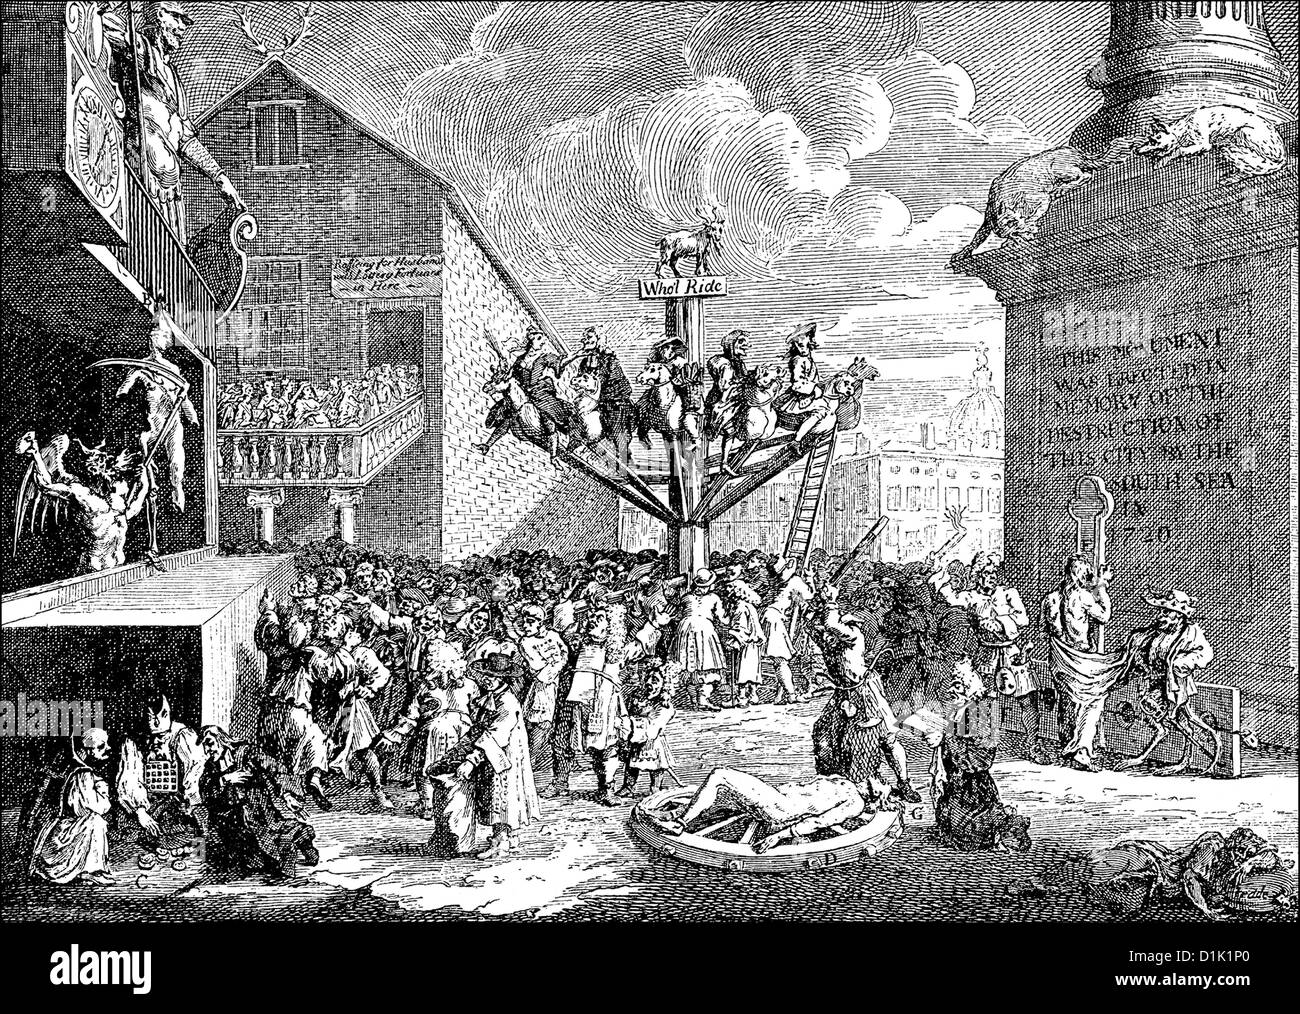 The South Sea Scheme, a caricature by William Hogarth, 1697 - 1764, a sociocritical English painter and graphic artist, image on Stock Photo